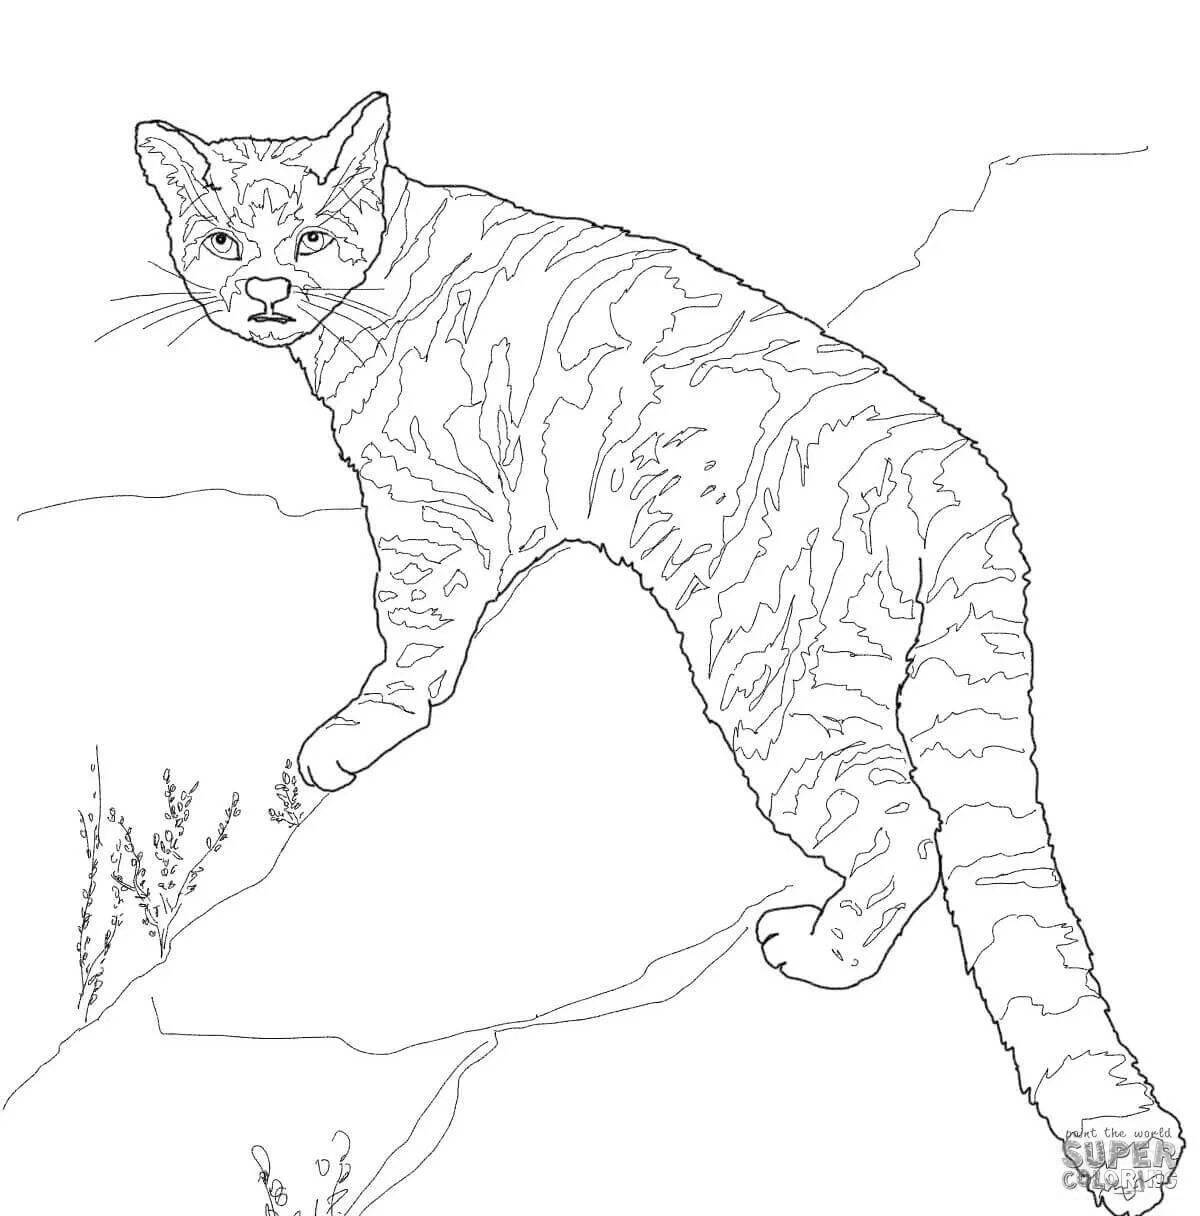 Attractive cane cat coloring page